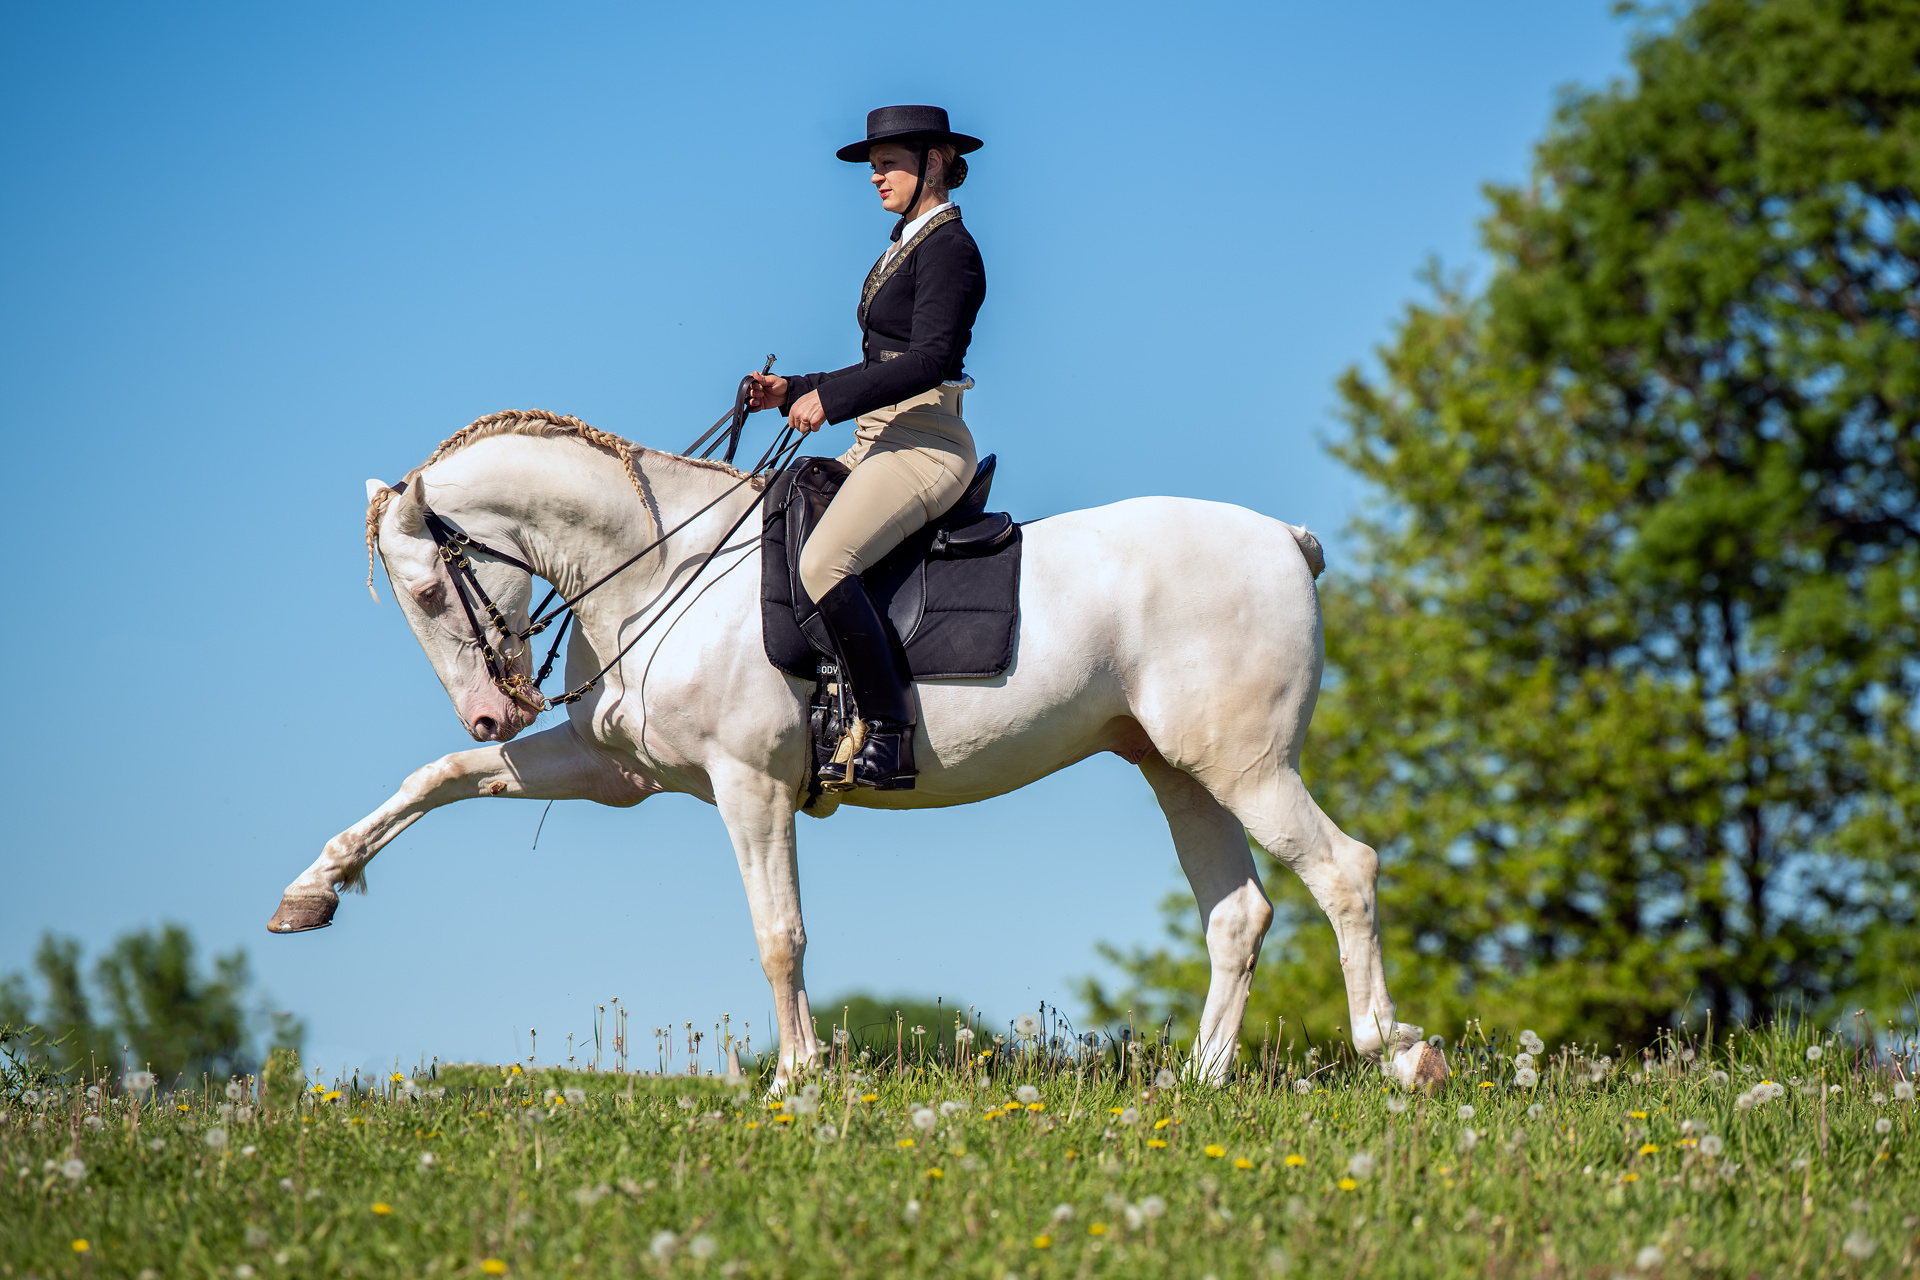 Equitation: Saddle seat style of equestrian activity, A traditional English style of horse riding. 1920x1280 HD Wallpaper.